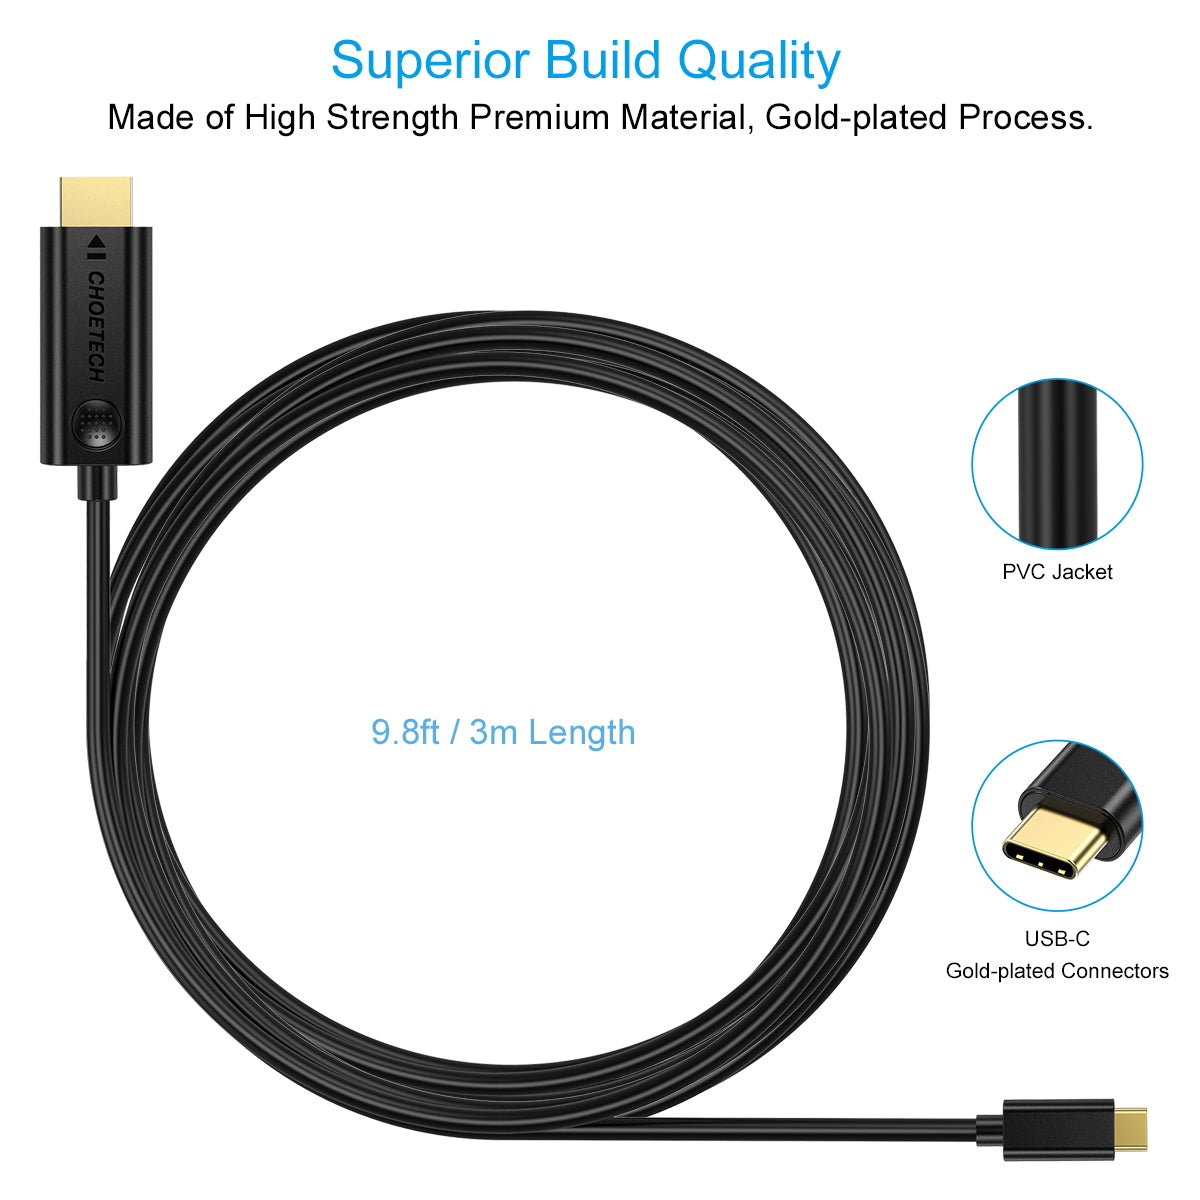 XCH-0030 USB C to HDMI Cable (10ft/3m), CHOETECH Type C (Thunderbolt 3) to HDMI 4K/30Hz Cable Compatible with iPad Pro, 2019/2018 MacBook Pro, iMac, MacBook, ChromeBook, Galaxy S10/S9/Note 10/Note 9, Dell XPS, etc